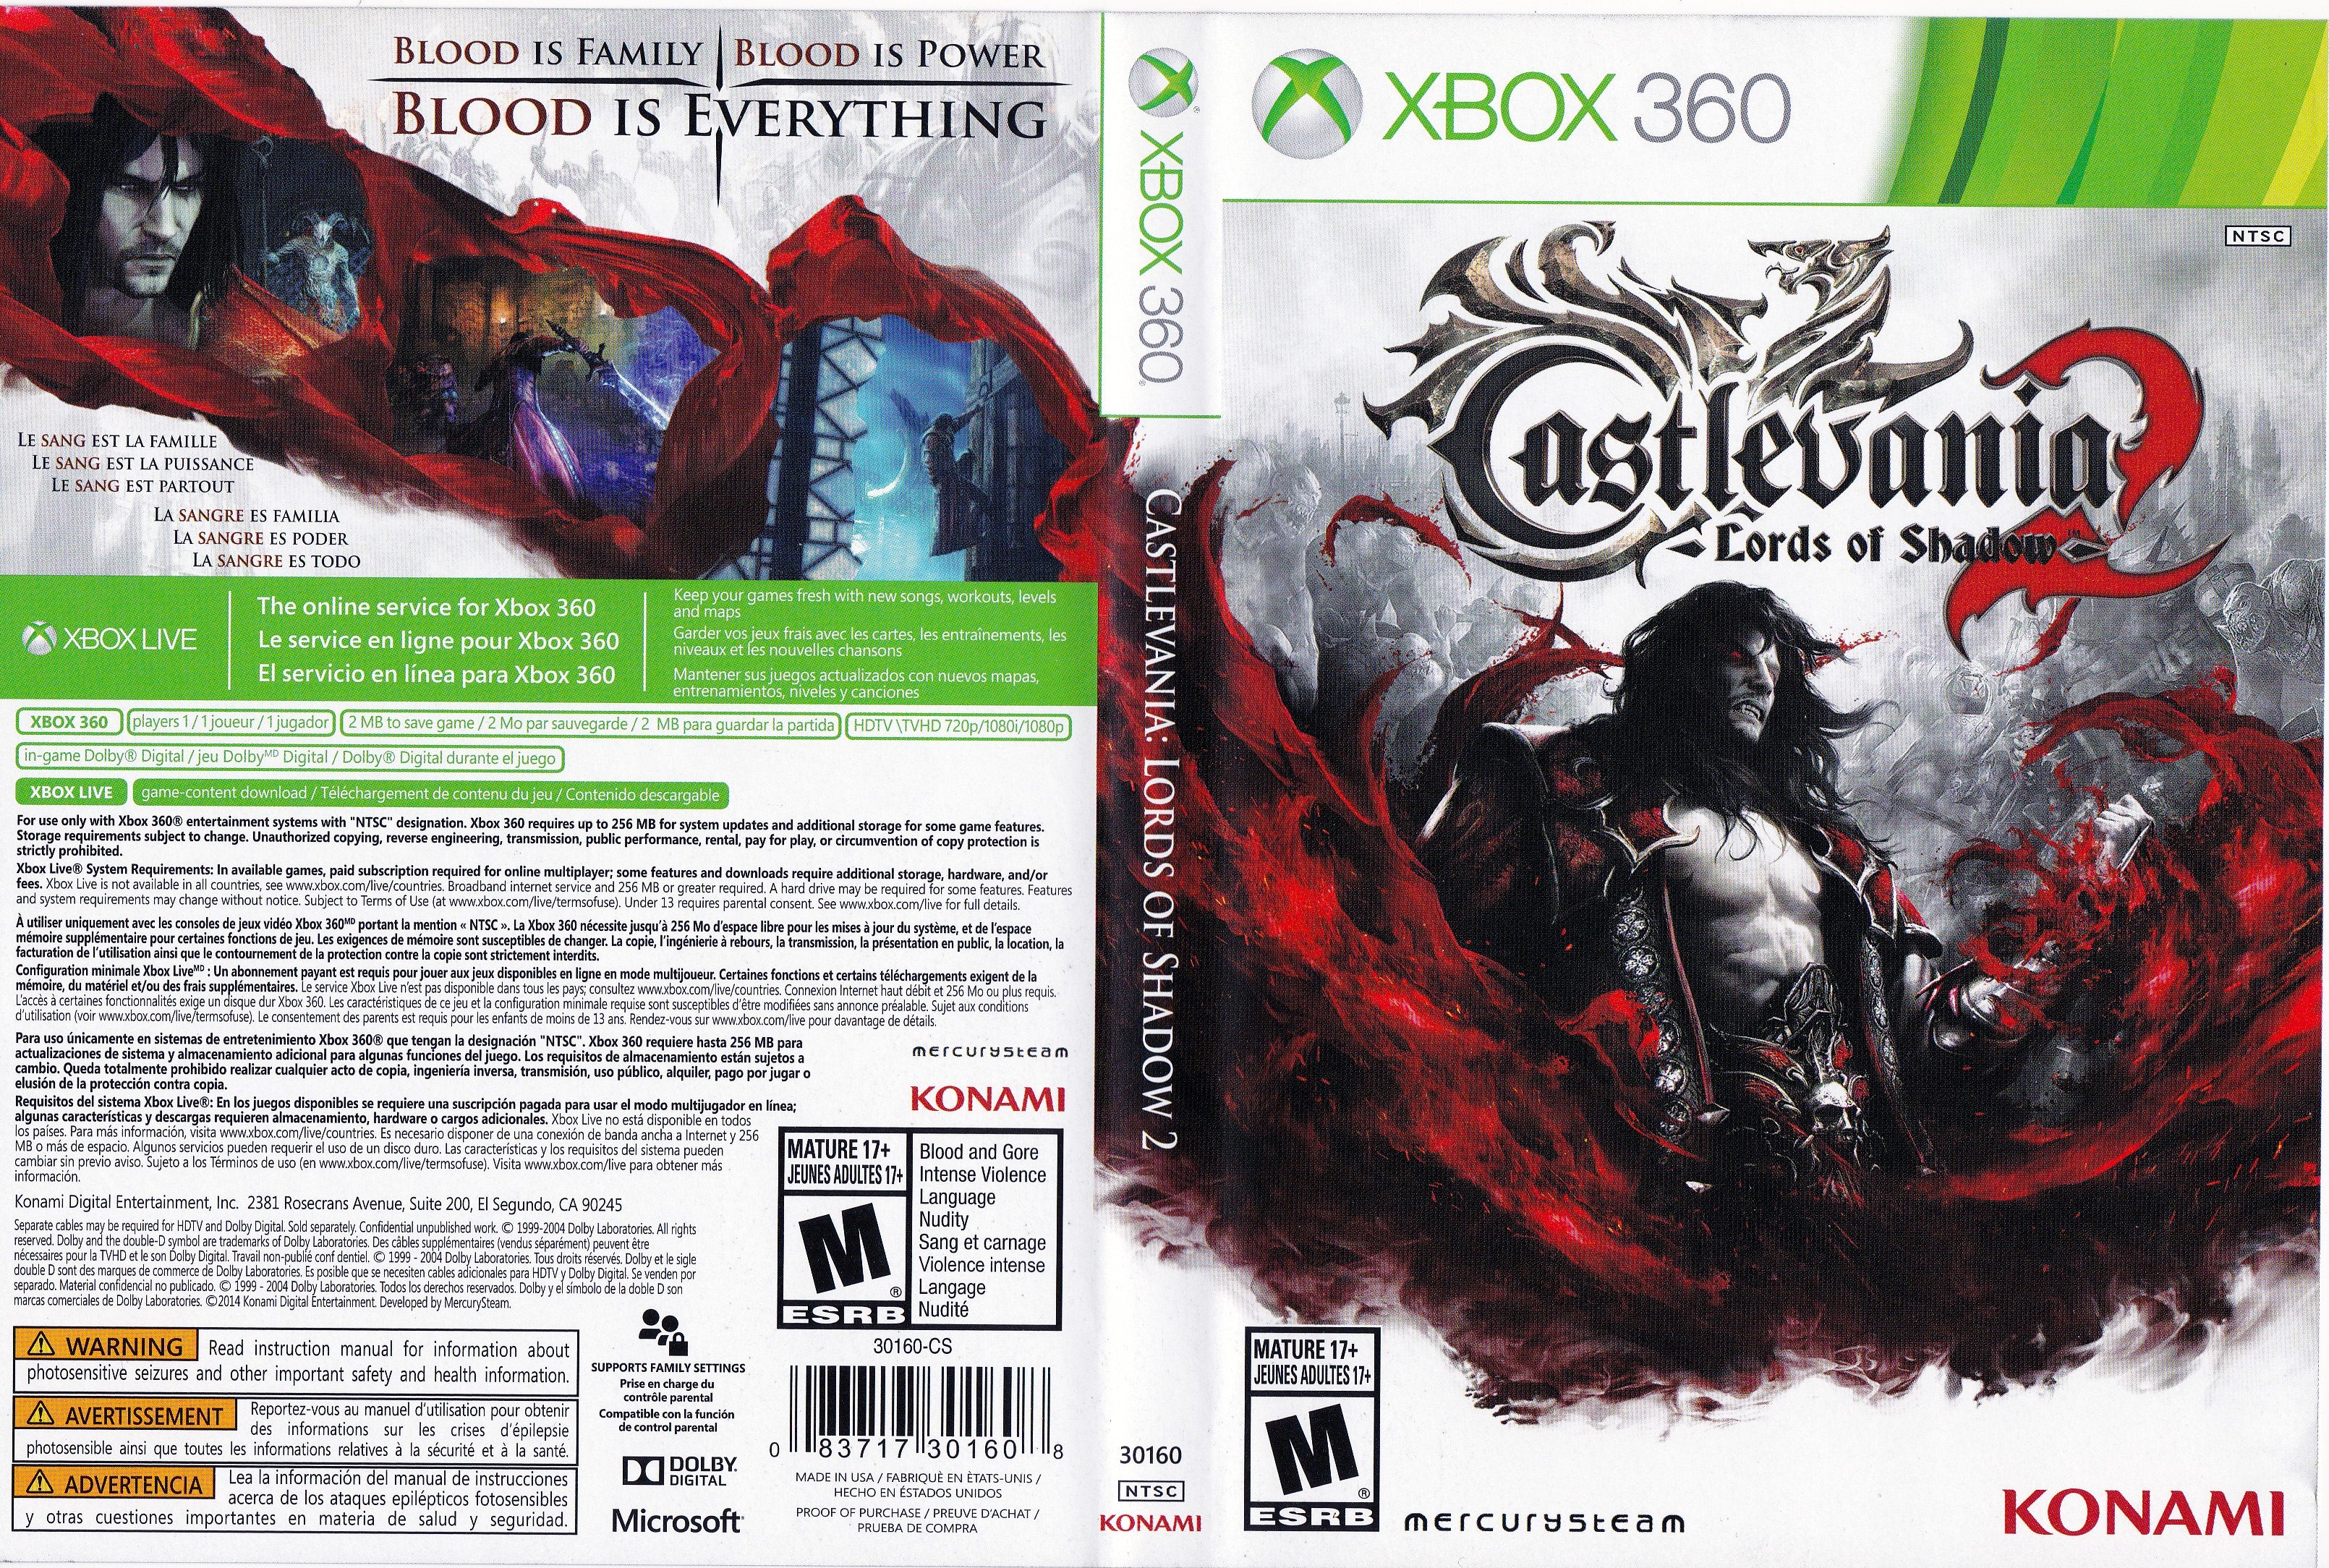 Castlevania - Lords of Shadow (Xbox 360)